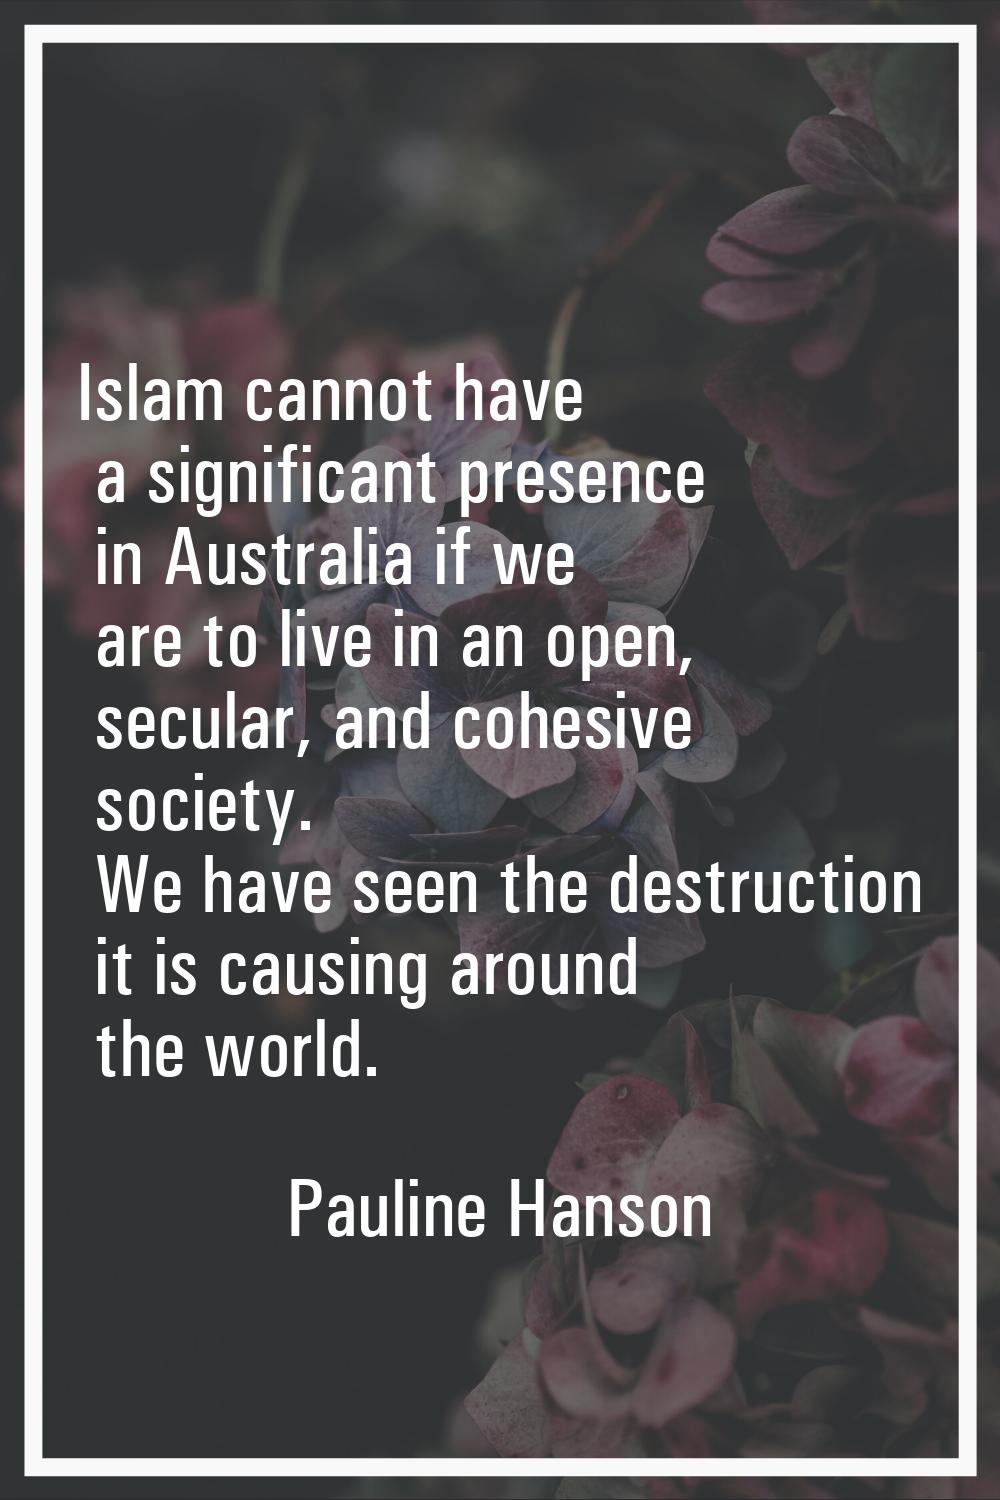 Islam cannot have a significant presence in Australia if we are to live in an open, secular, and co